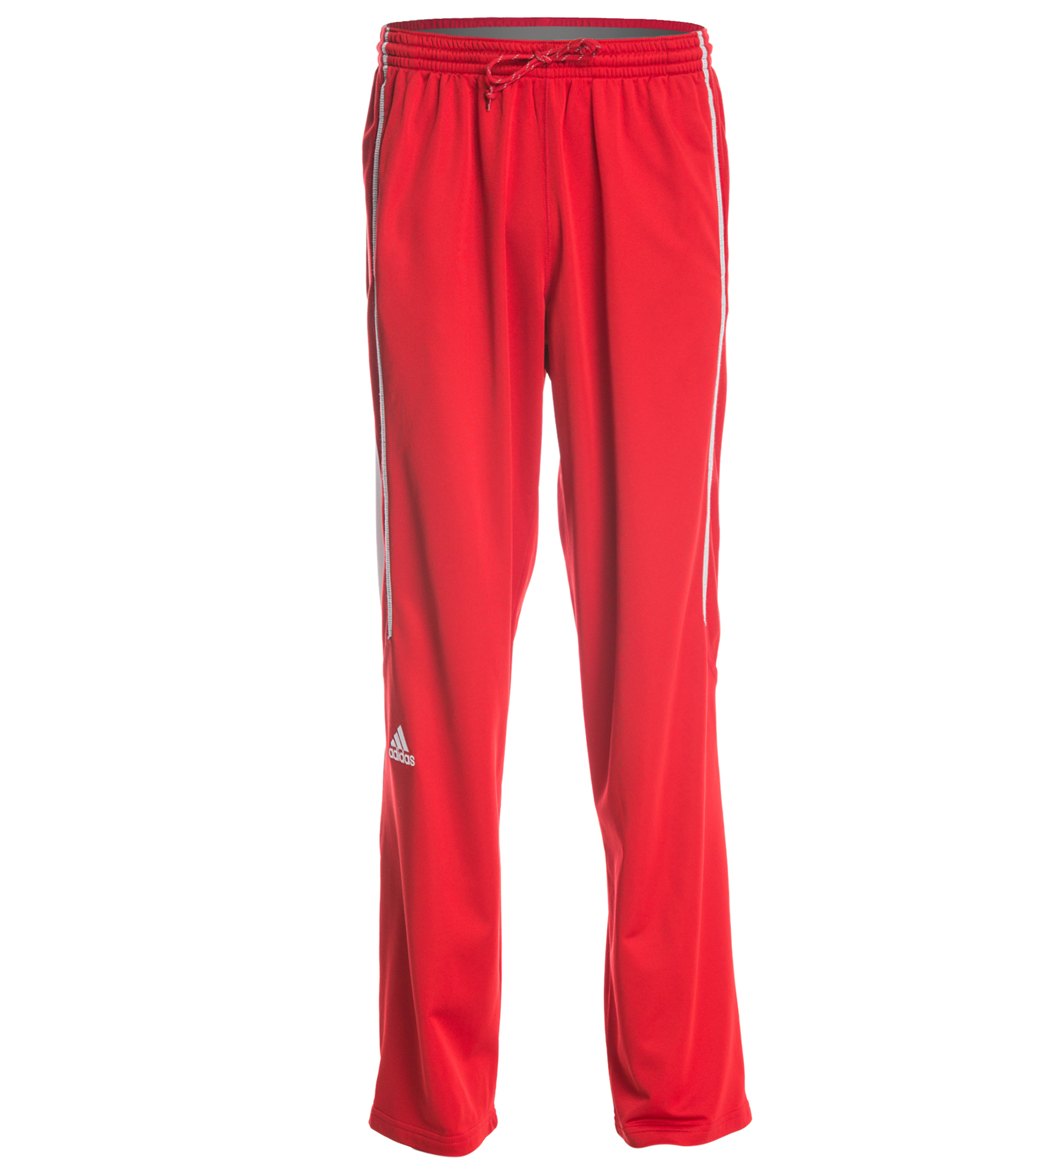 Adidas Men's Utility Warm Up Pants - Red Large Polyester - Swimoutlet.com